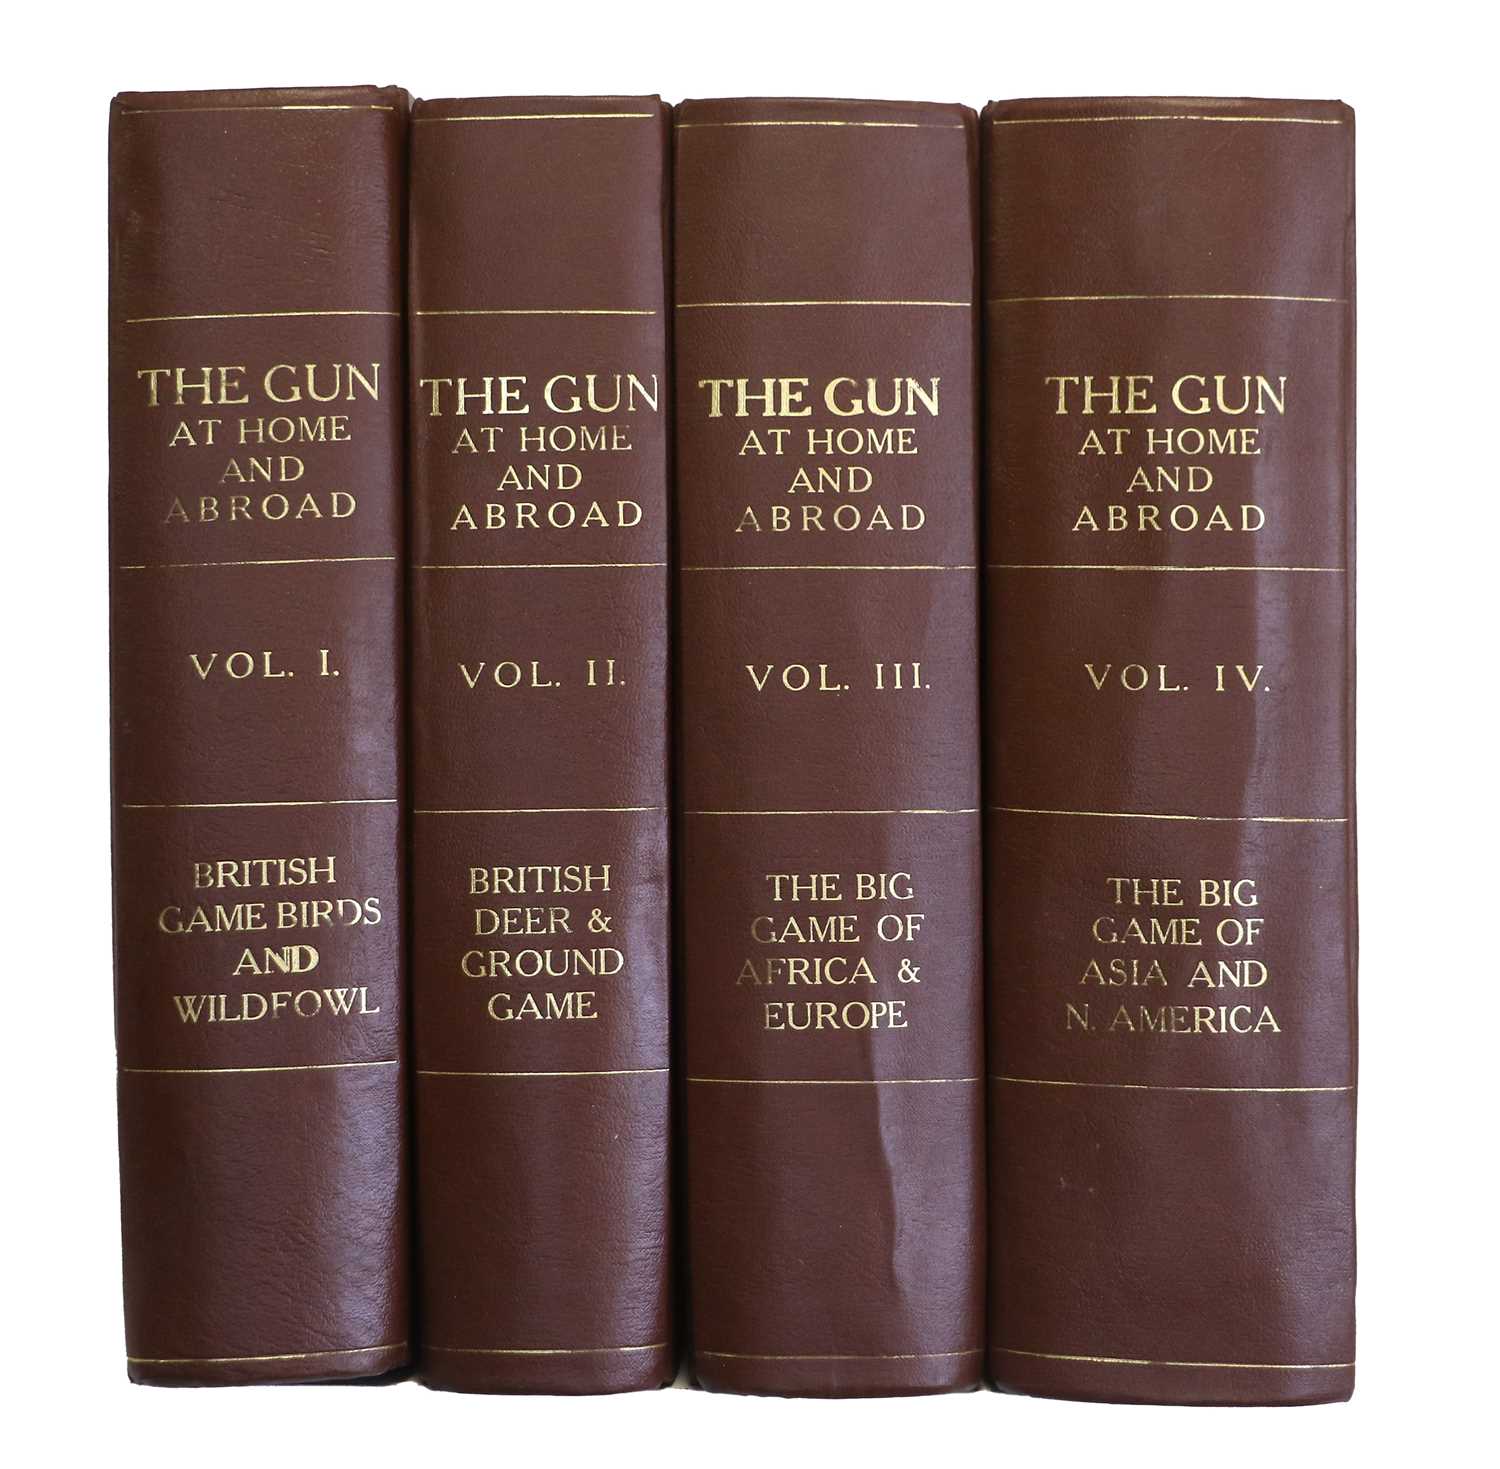 Ogilvie-Grant (W. R. and others) The Gun at Home and Abroad, four volume set, comprising: British